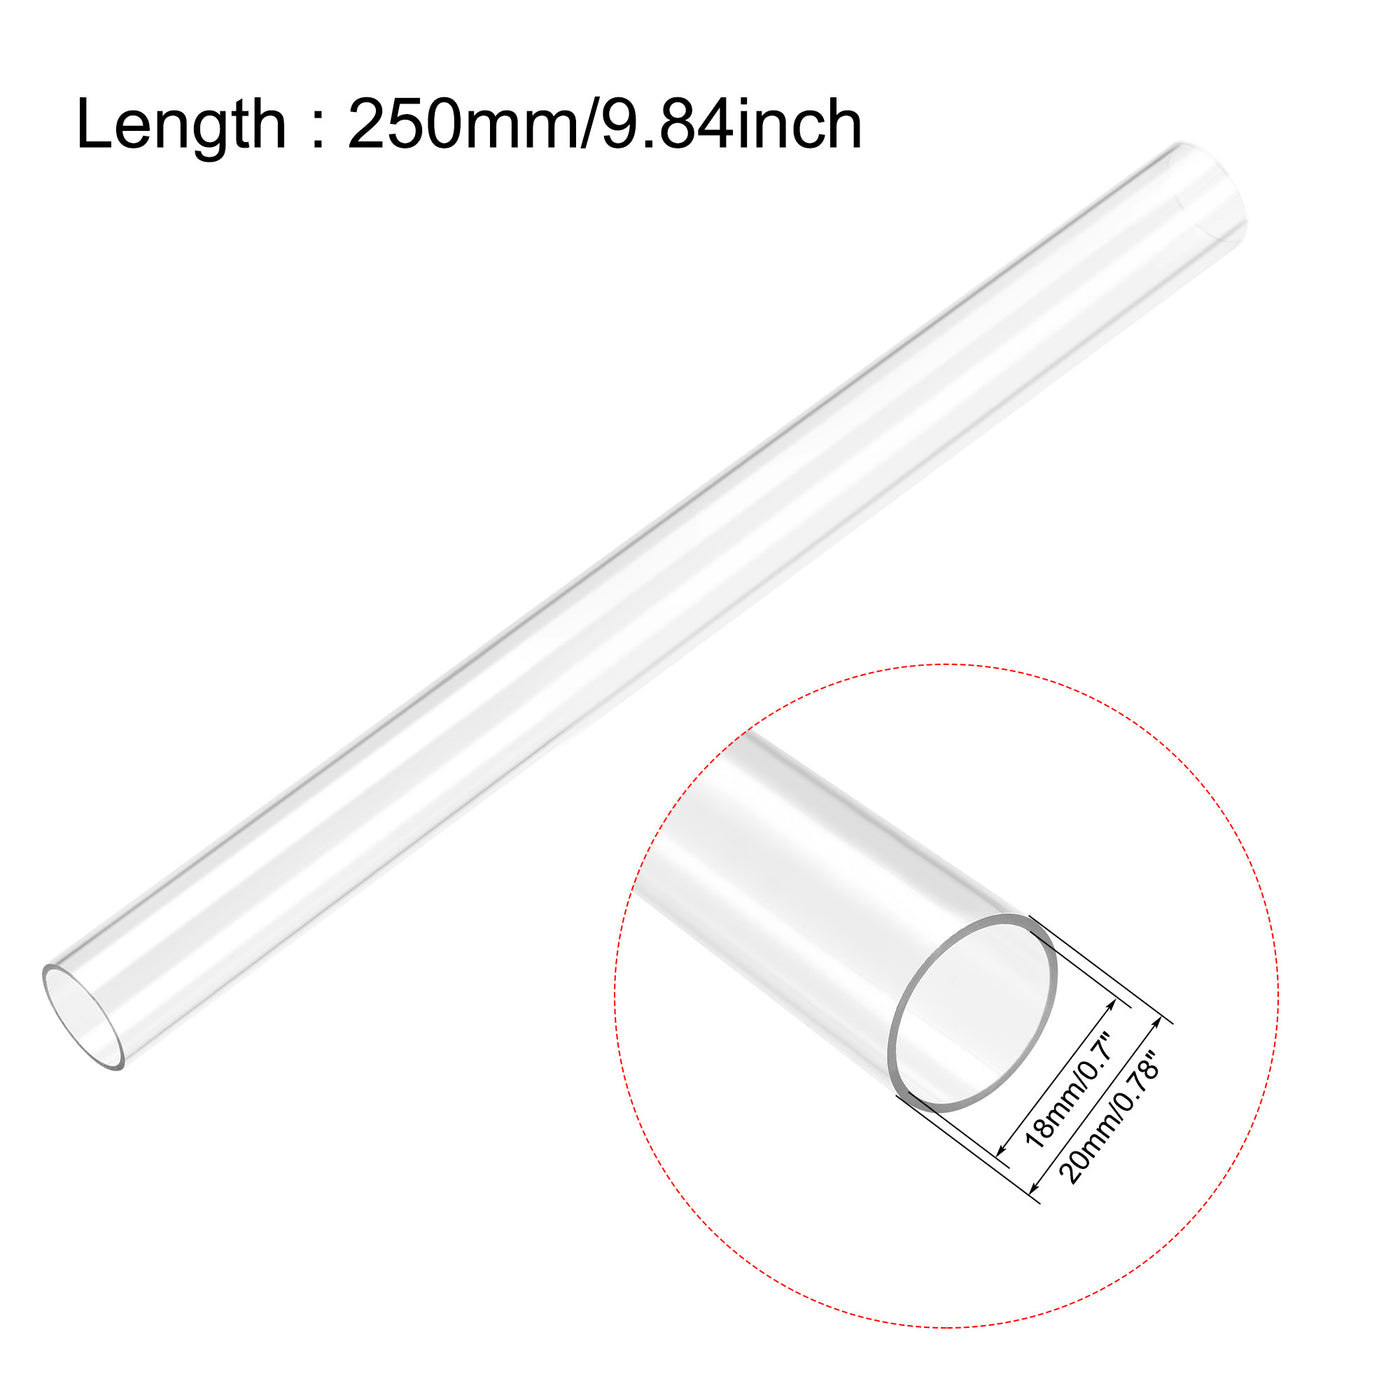 Uxcell Uxcell Polycarbonate Rigid Round Clear Tubing 6mm(0.23 Inch)IDx8mm(0.31 Inch)ODx200mm(7.87 Inch) Length Plastic Storage Transparent Tube with Black Lids 2pcs